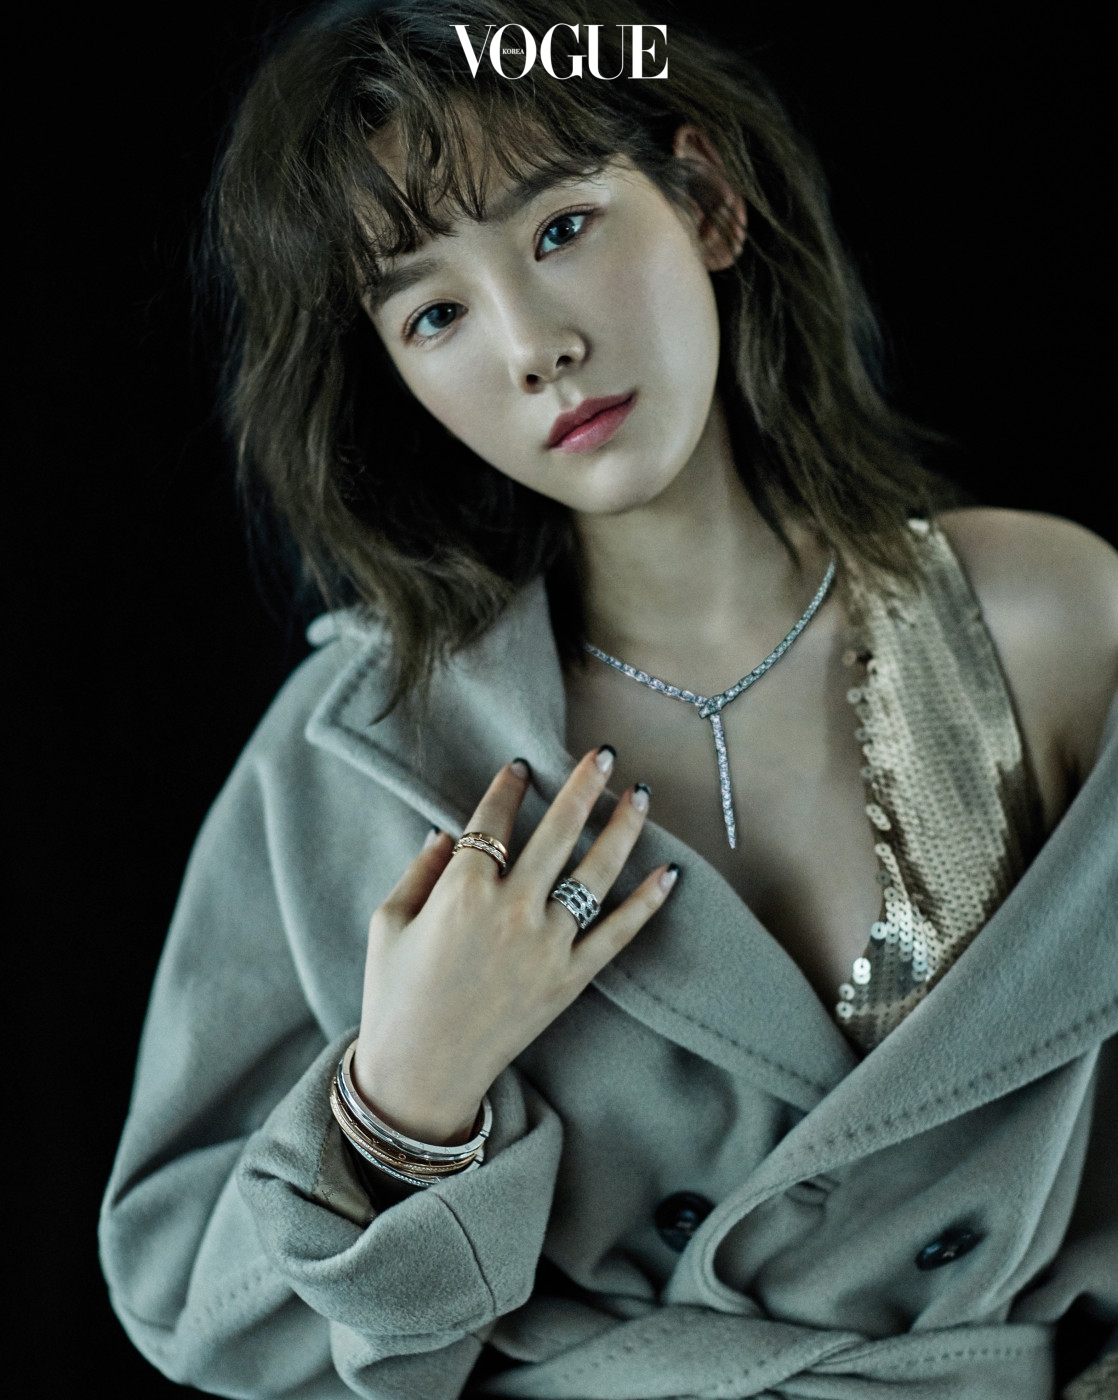 More of SNSD's TaeYeon and SooYoung for VOGUE's December issue ...